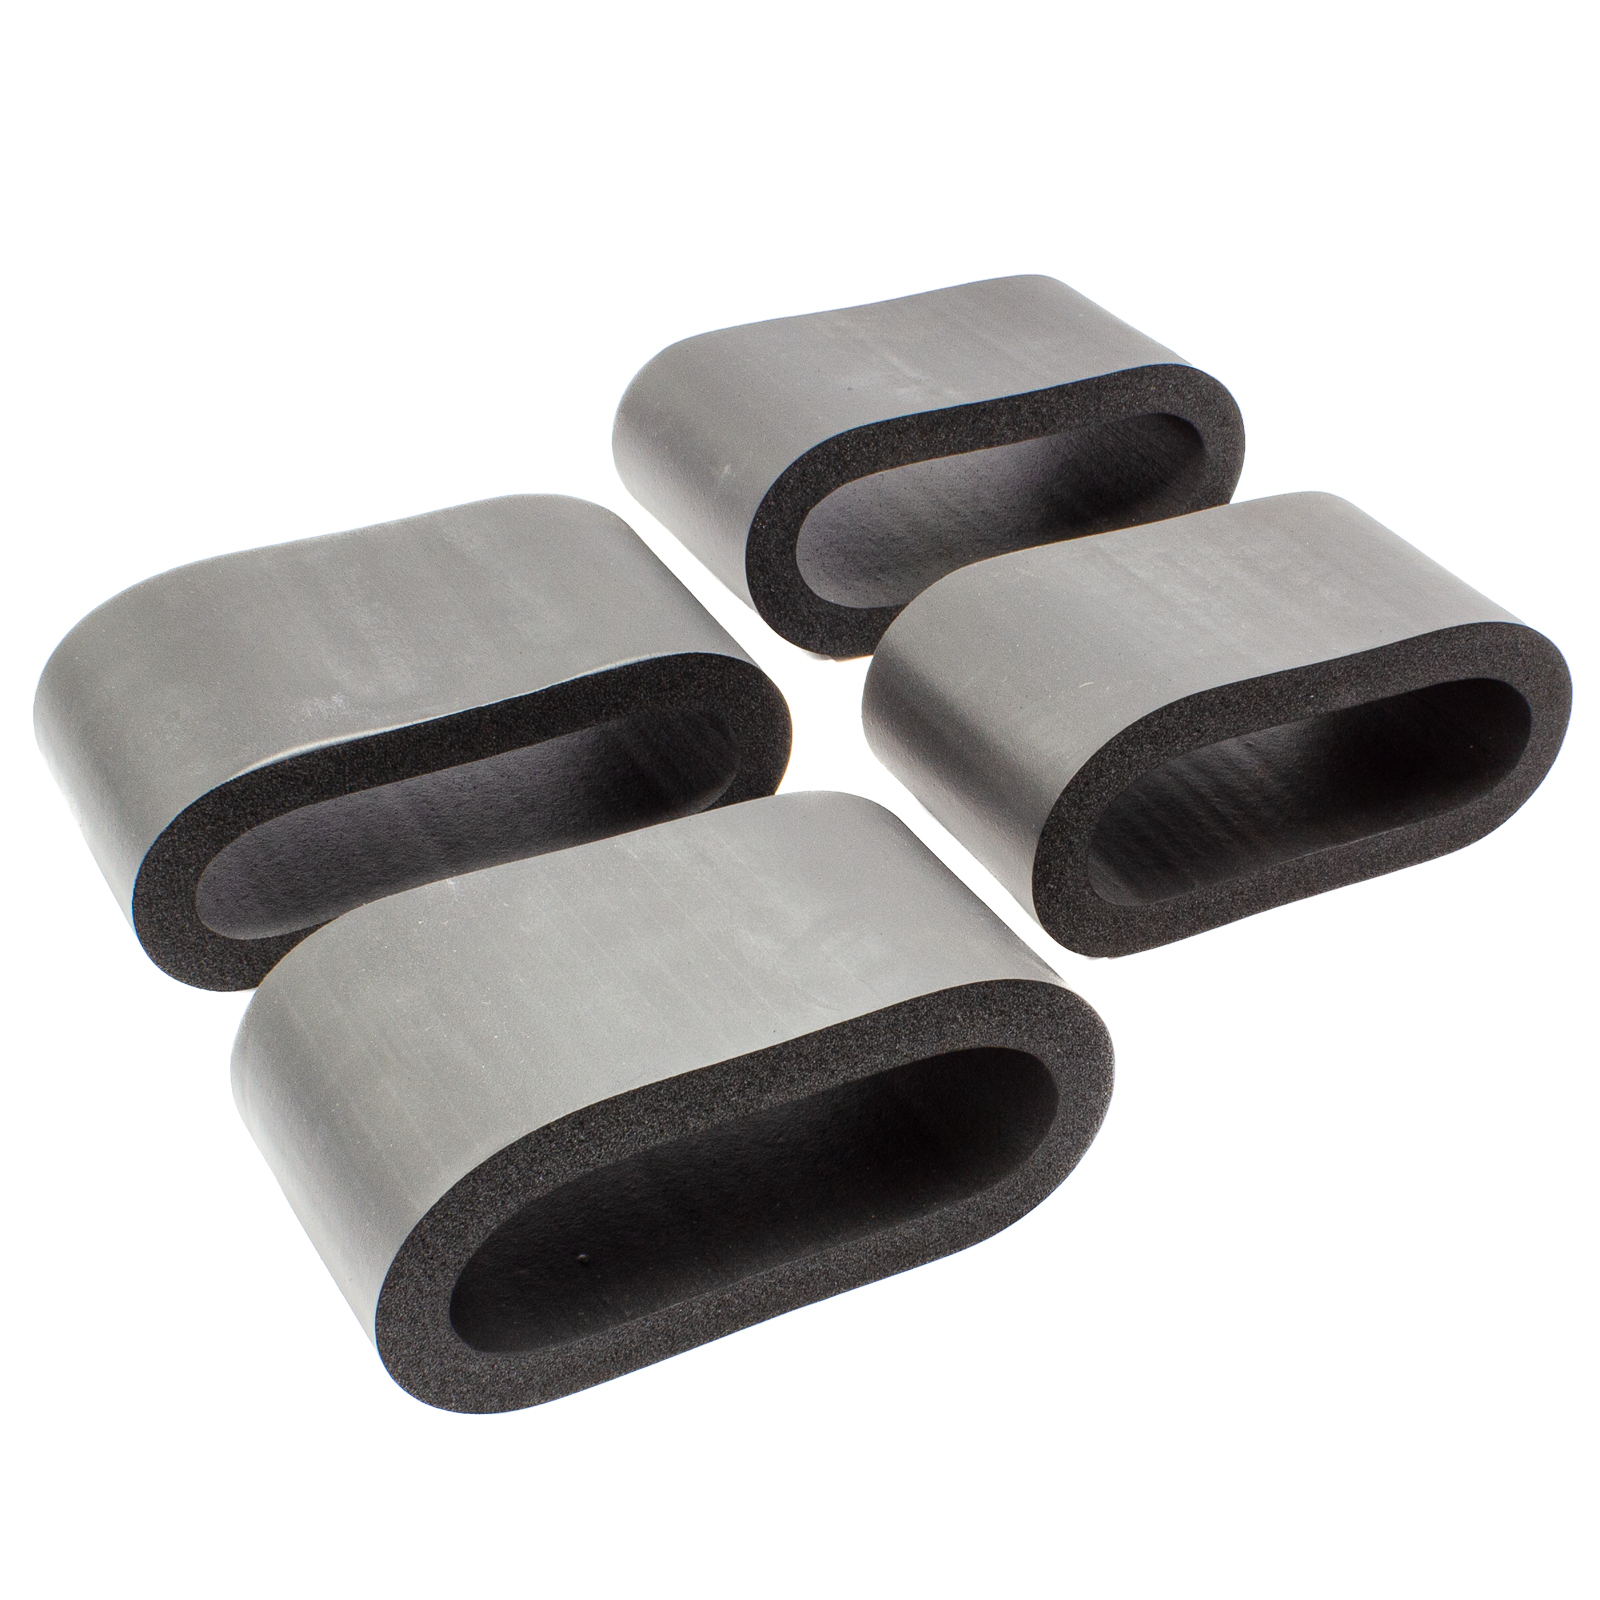 Will these pads replace my Thule jbar pads?